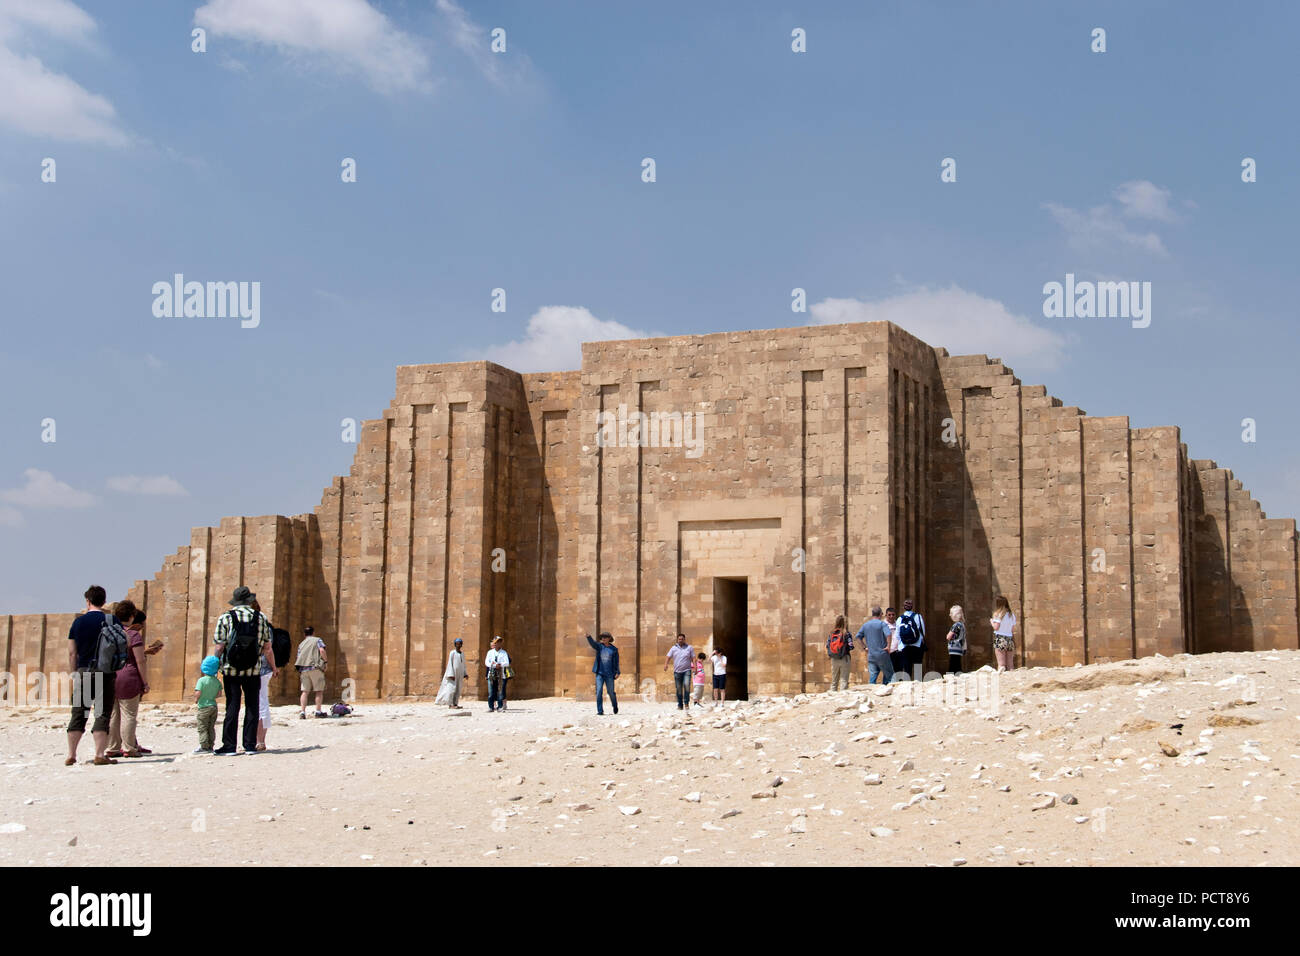 Entrance to the Saqqara necropolis, which houses the Pyramid of Djoser, a step pyramid considered the first pyramid built in Egypt. Stock Photo